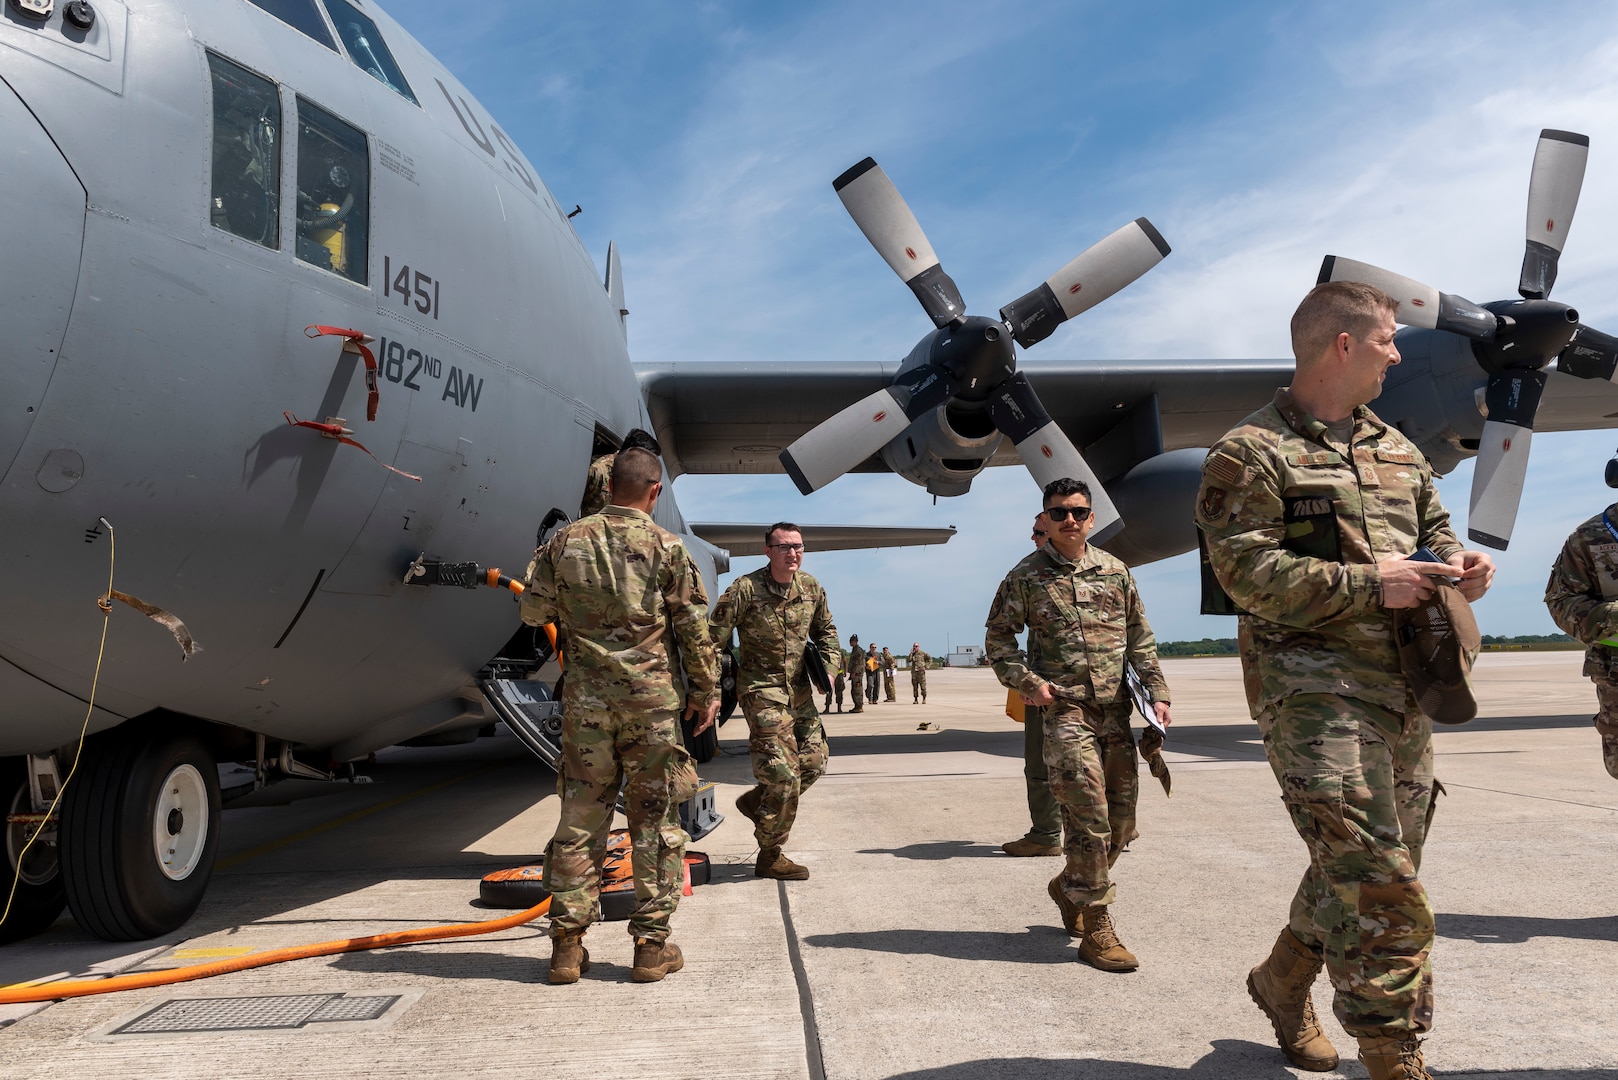 U.S. Airmen with the 182nd Airlift Wing, Illinois National Guard, deplane a C-130 Hercules aircraft to prepare for exercise Air Defender 2023 at Wunstorf Air Base, Wunstorf, Germany, May 31, 2023. Exercise AD23 integrates U.S. and Allied air power to defend shared values, while leveraging and strengthening vital partnerships to deter aggression around the world.